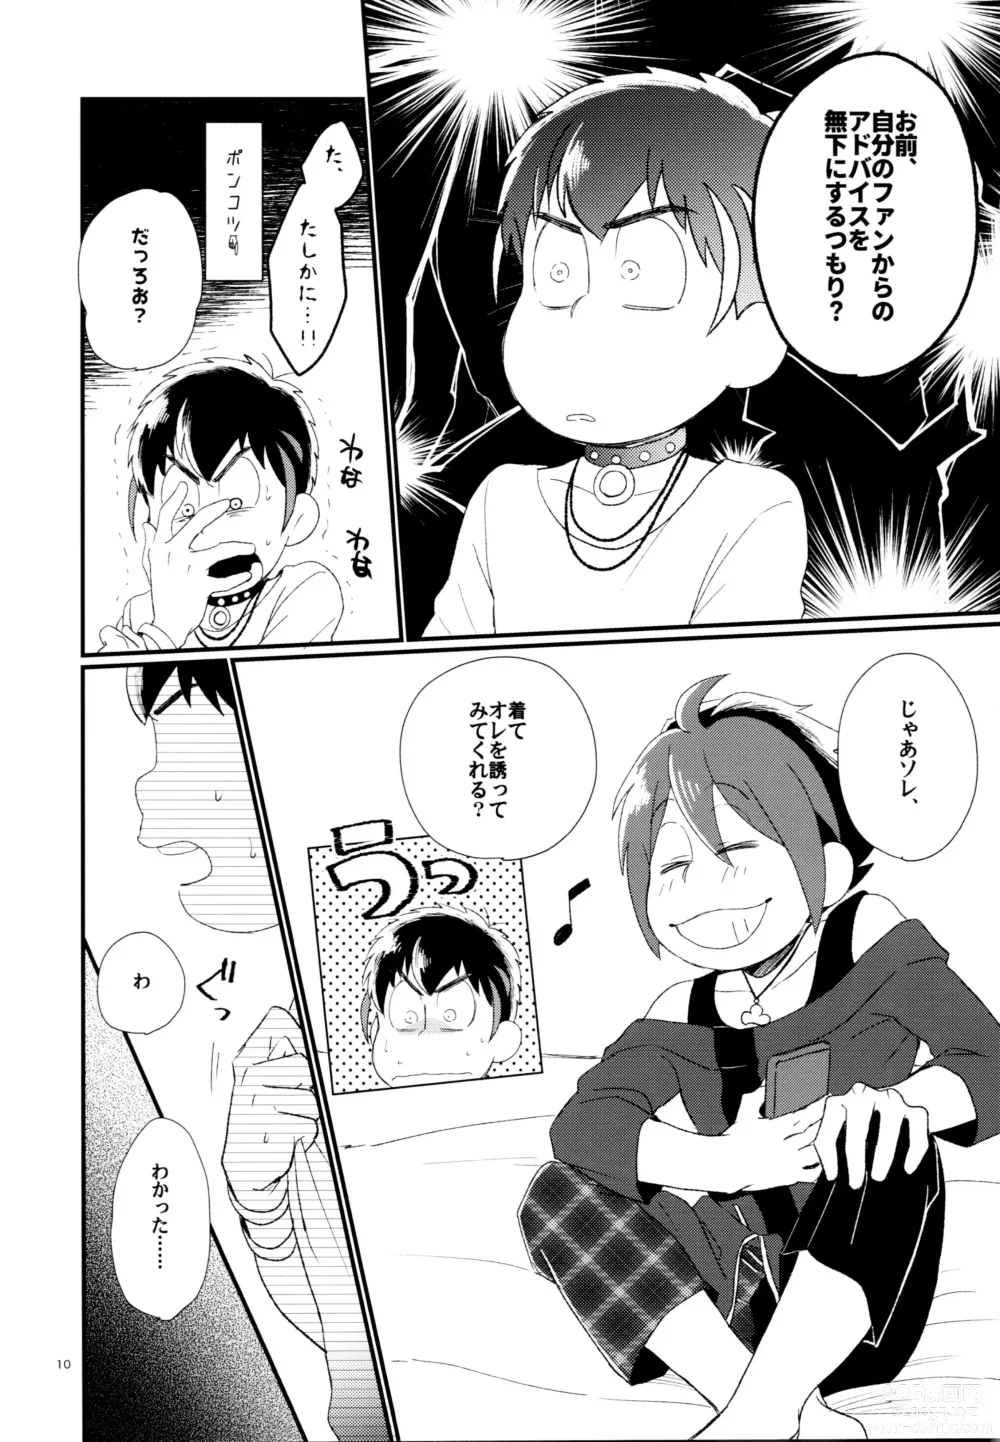 Page 10 of doujinshi A book where OSO seals away the pain of Kara and graduates from virginity.